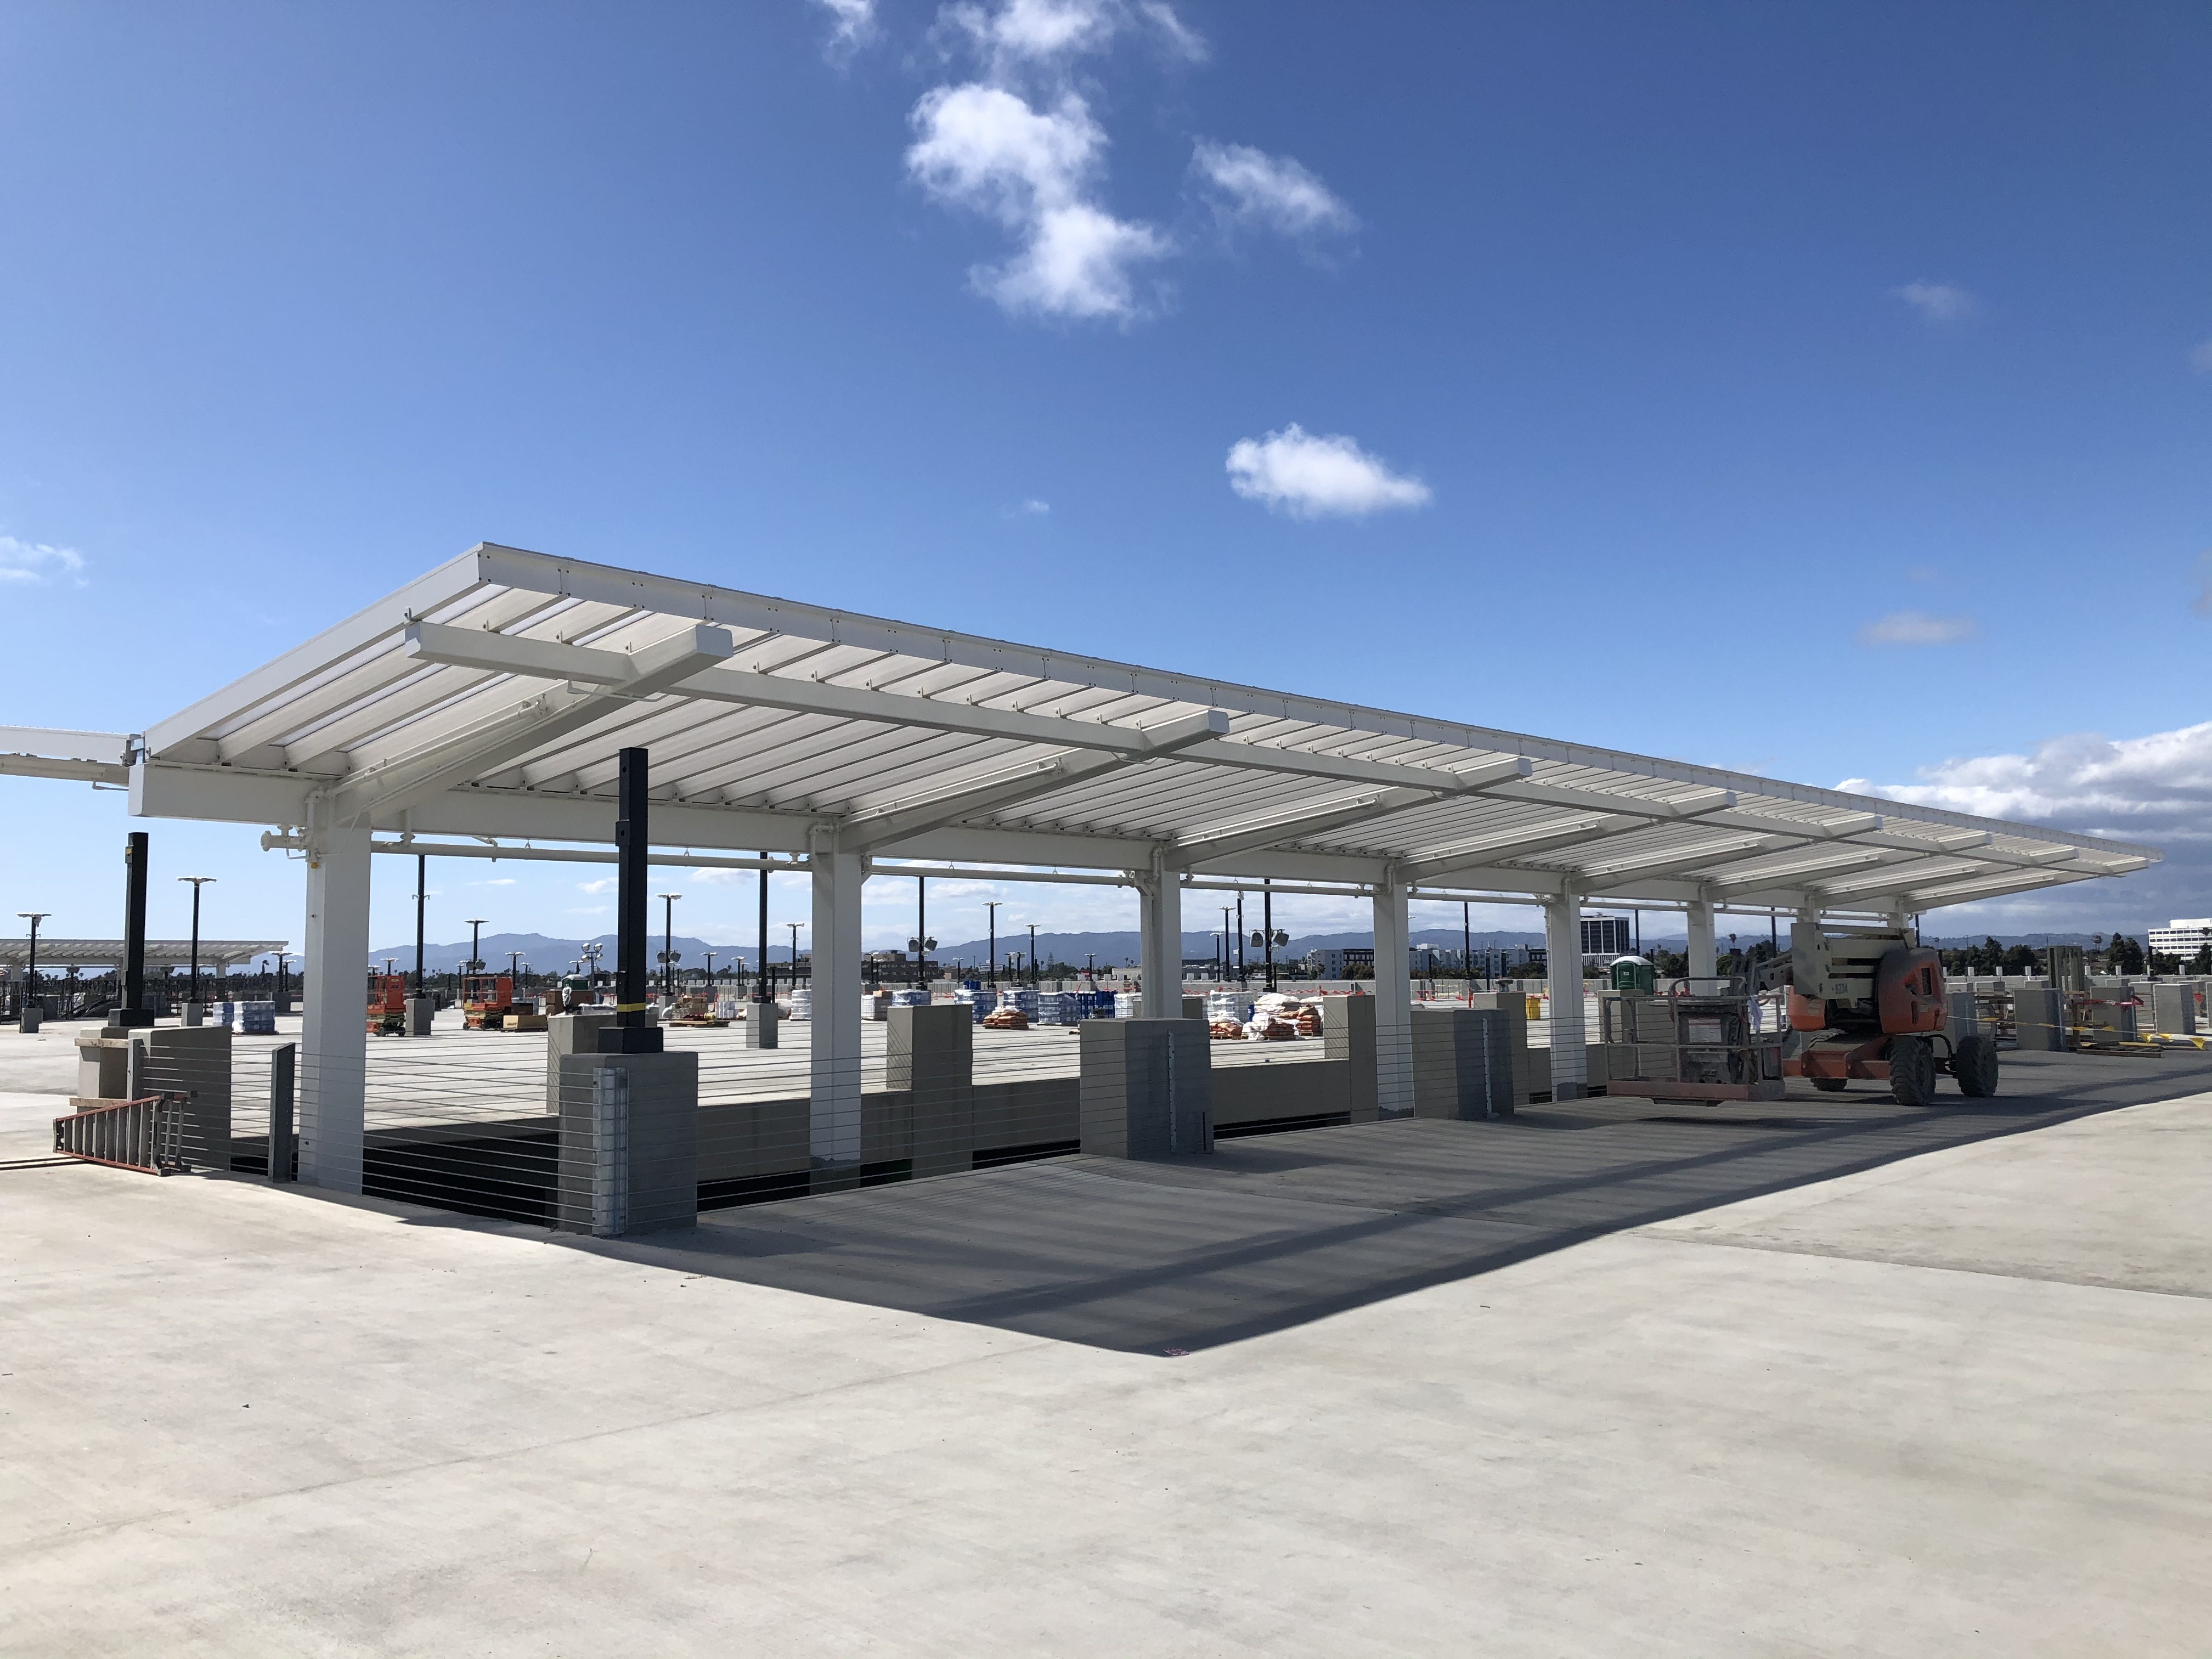 A rooftop view of the escalator canopy at the Intermodal Transportation Facility-West.